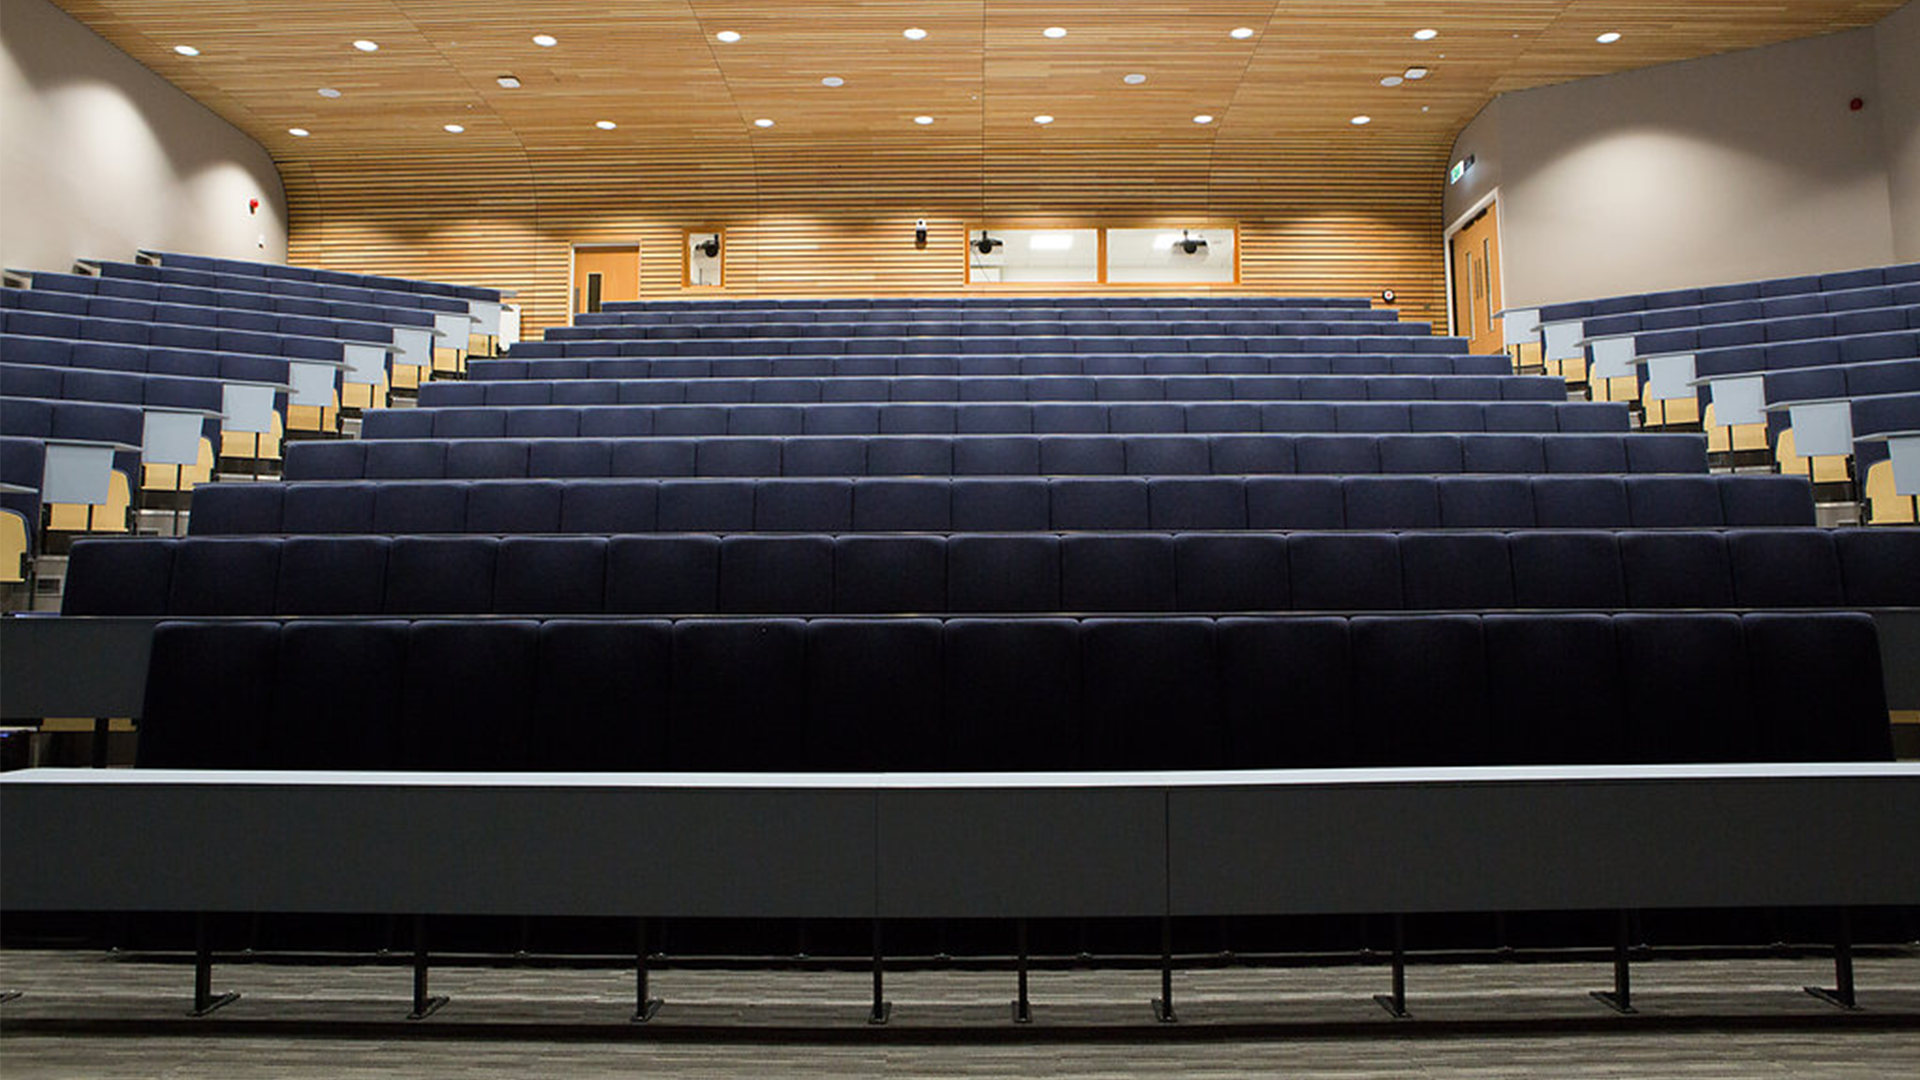 Tiered lecture theatre with students seated and walking through